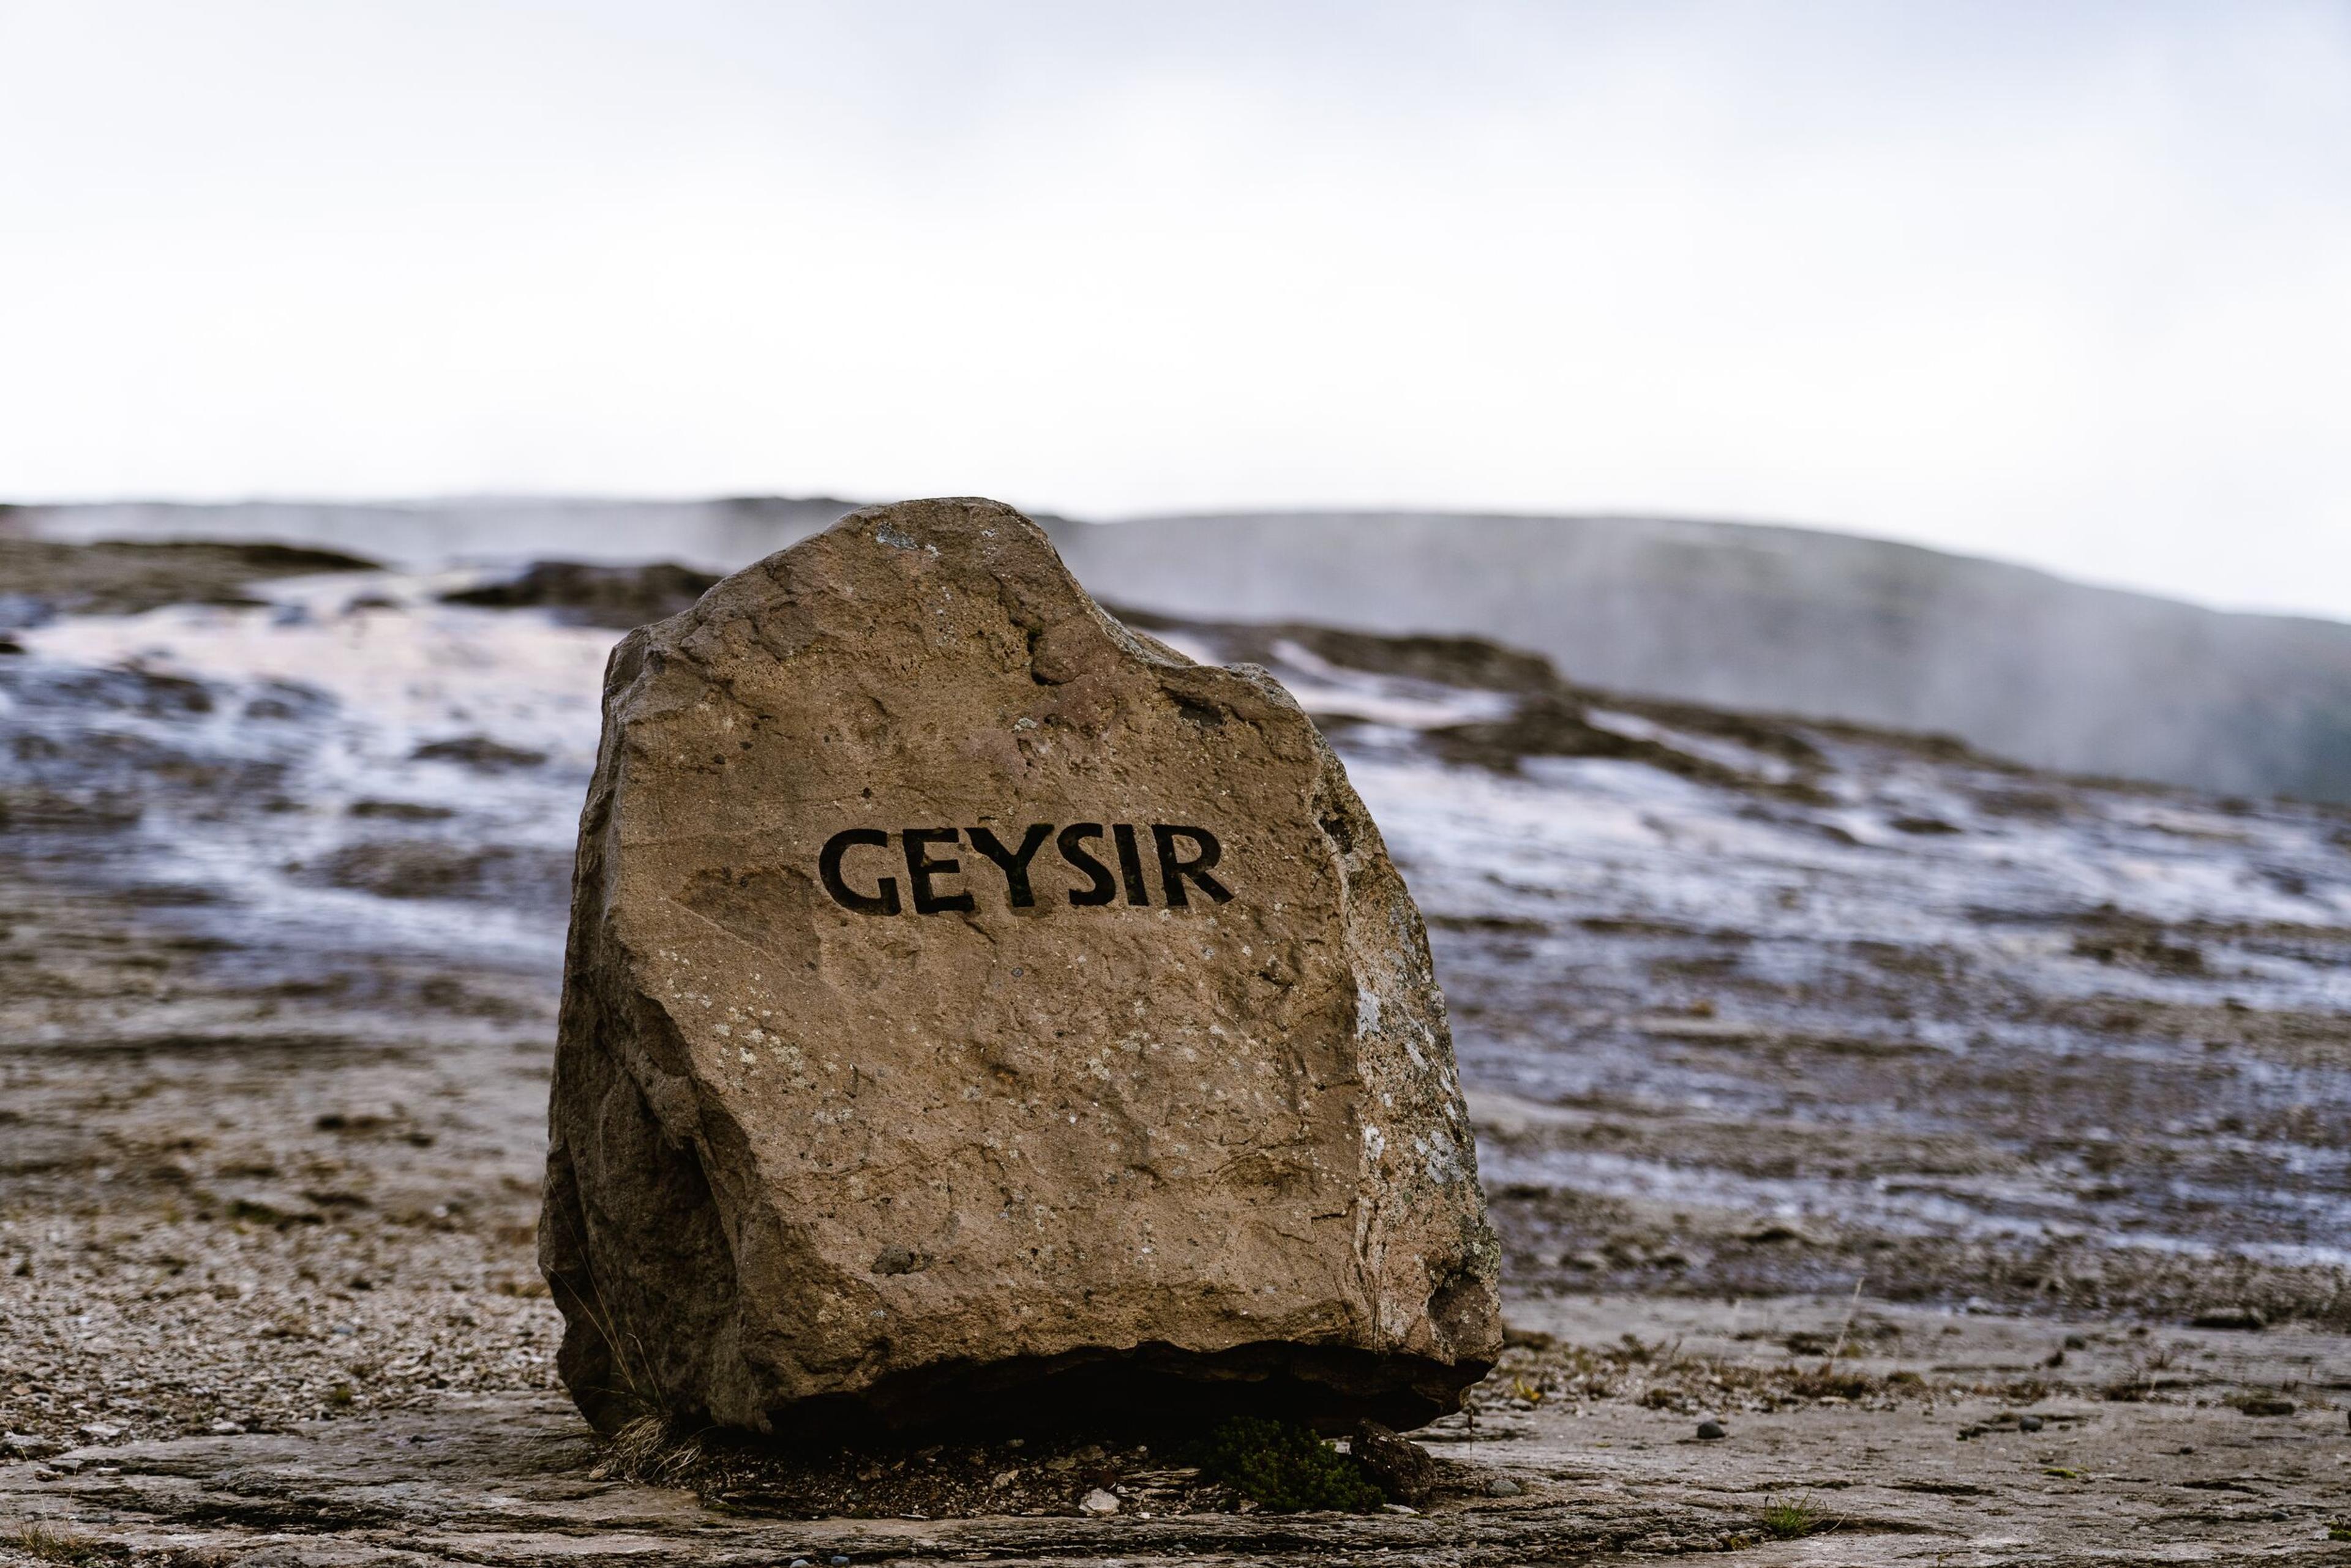 Stone with the name Geysir on it.